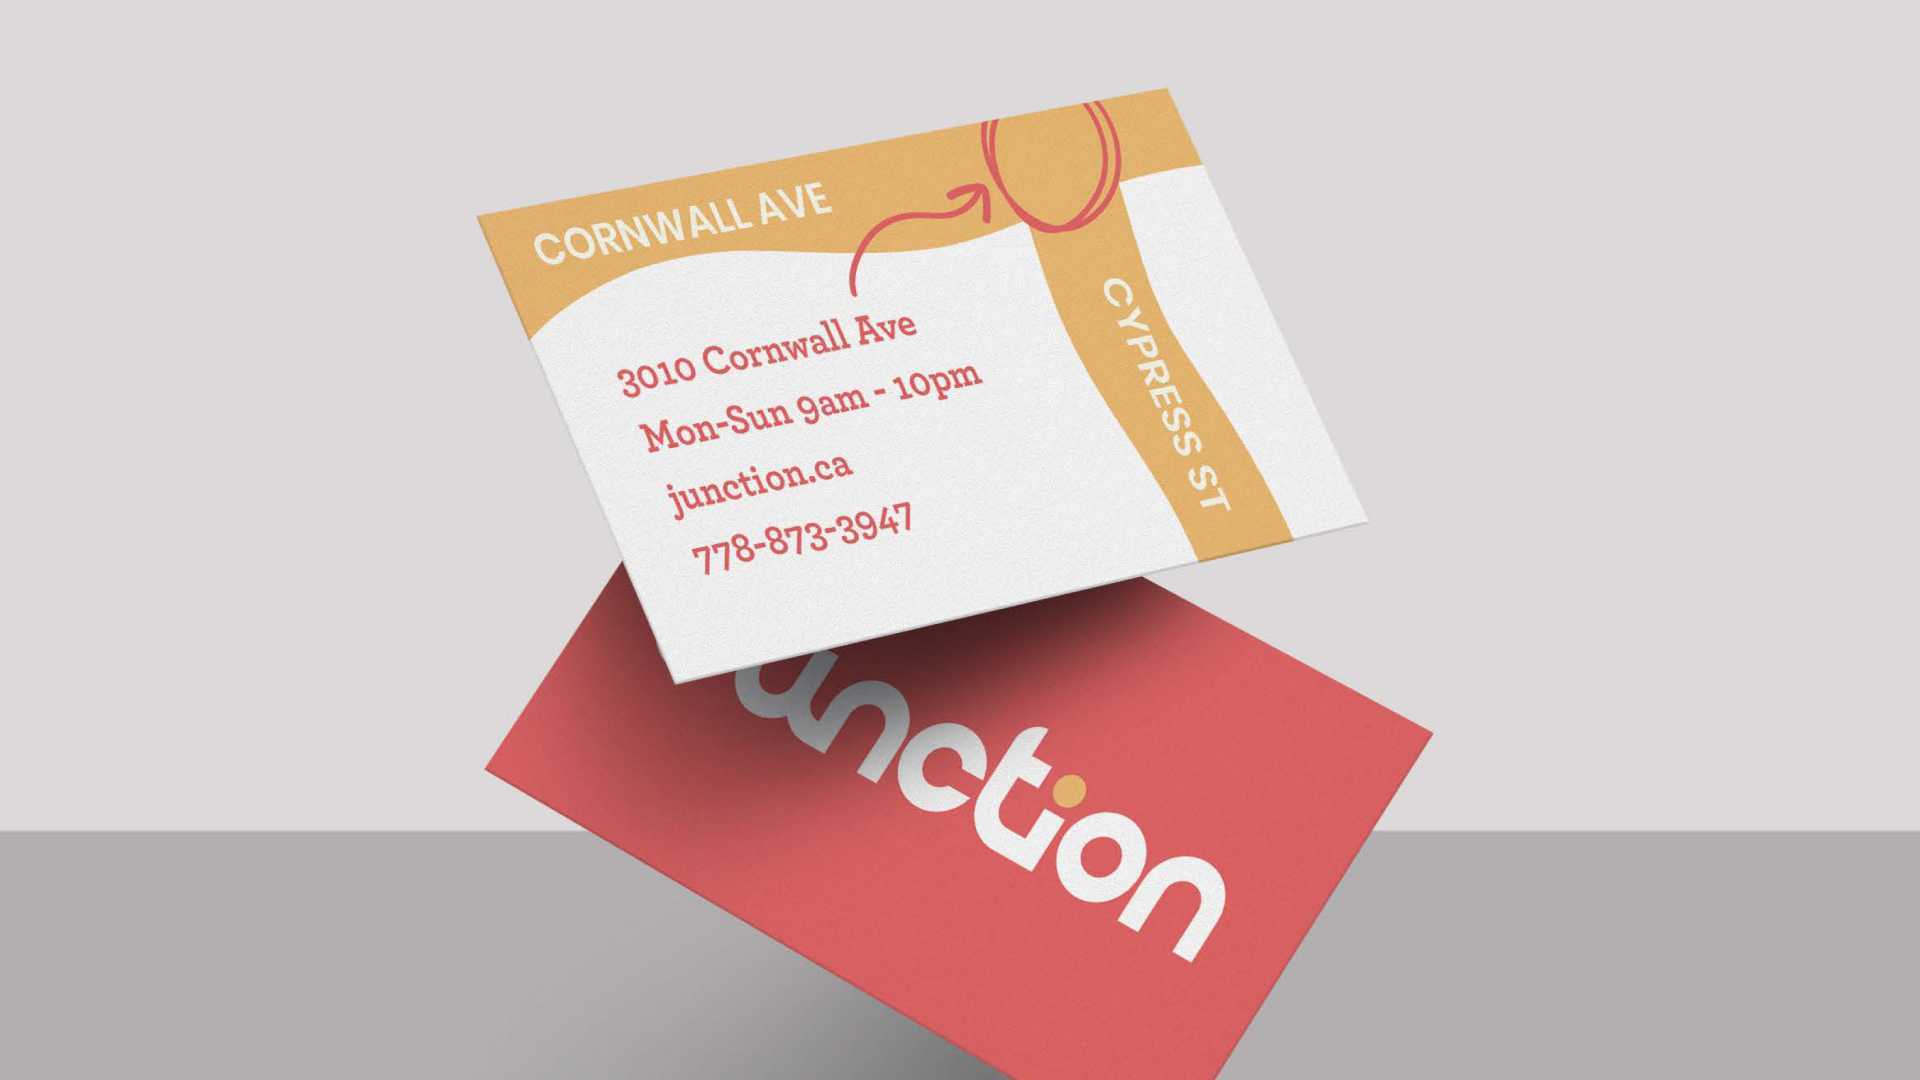 business cards of junction pointing at the intersection between cornwall aveune and cypress street located in vancouver, canada